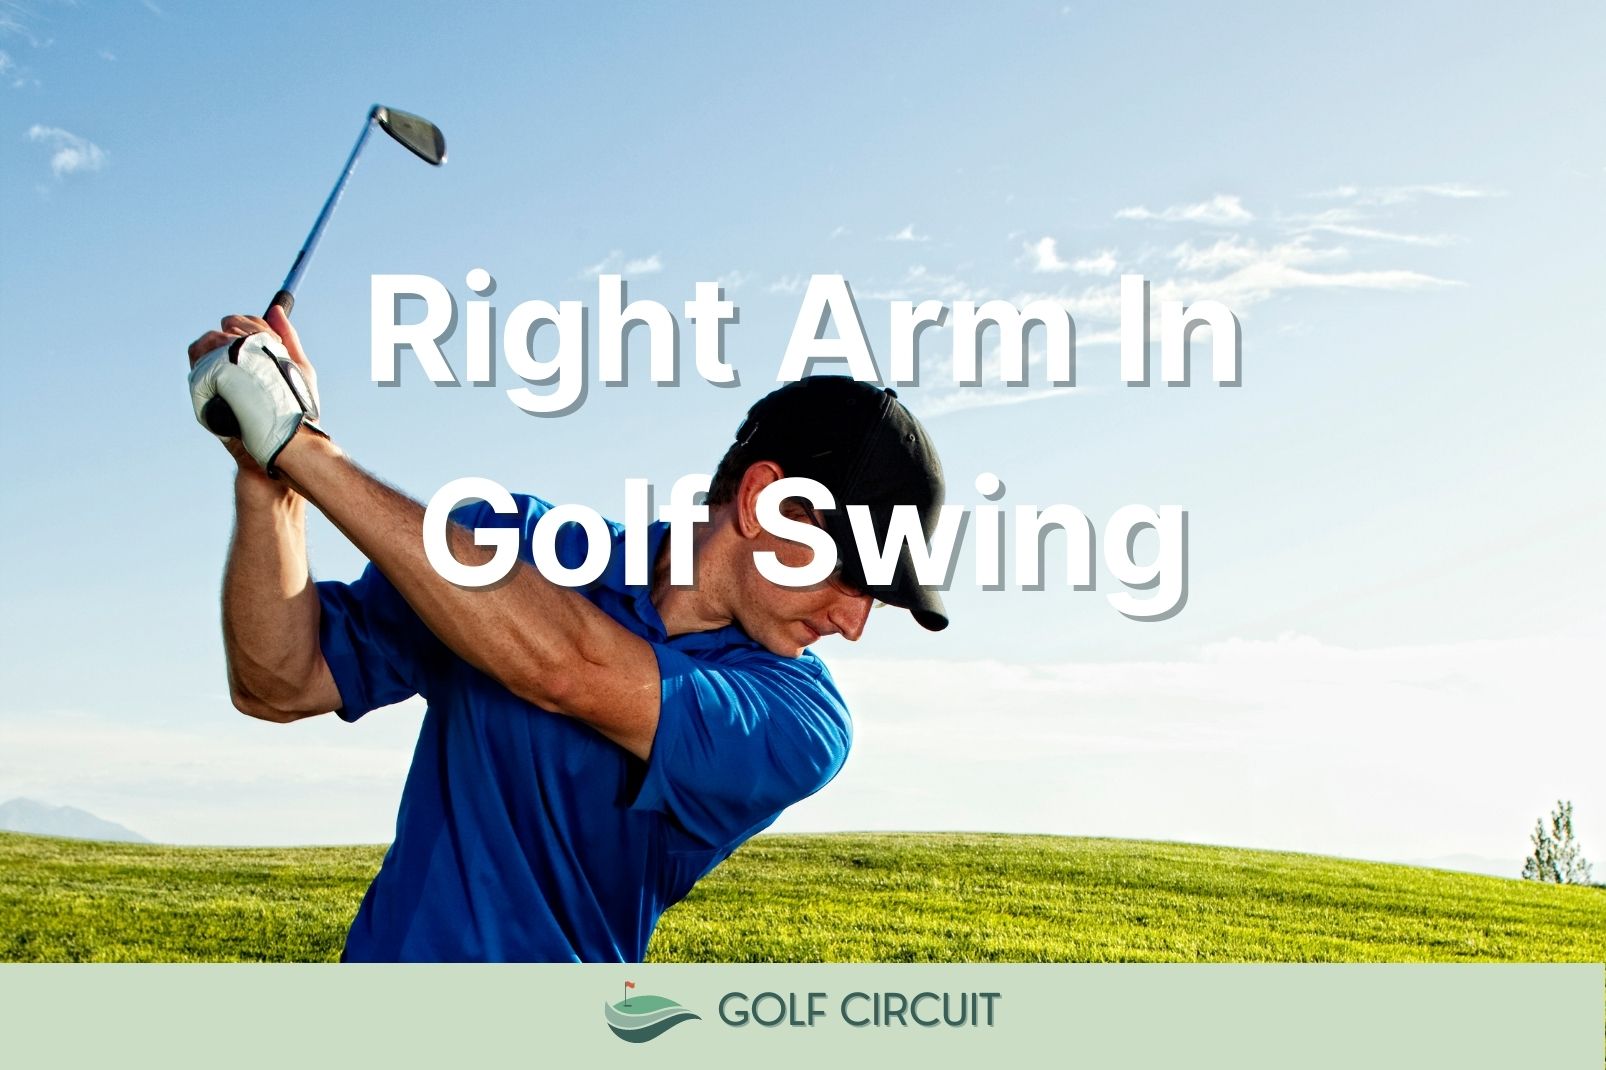 Right Arm in Golf Swing: Having Perfect Form (3 Drills) - Golf Circuit